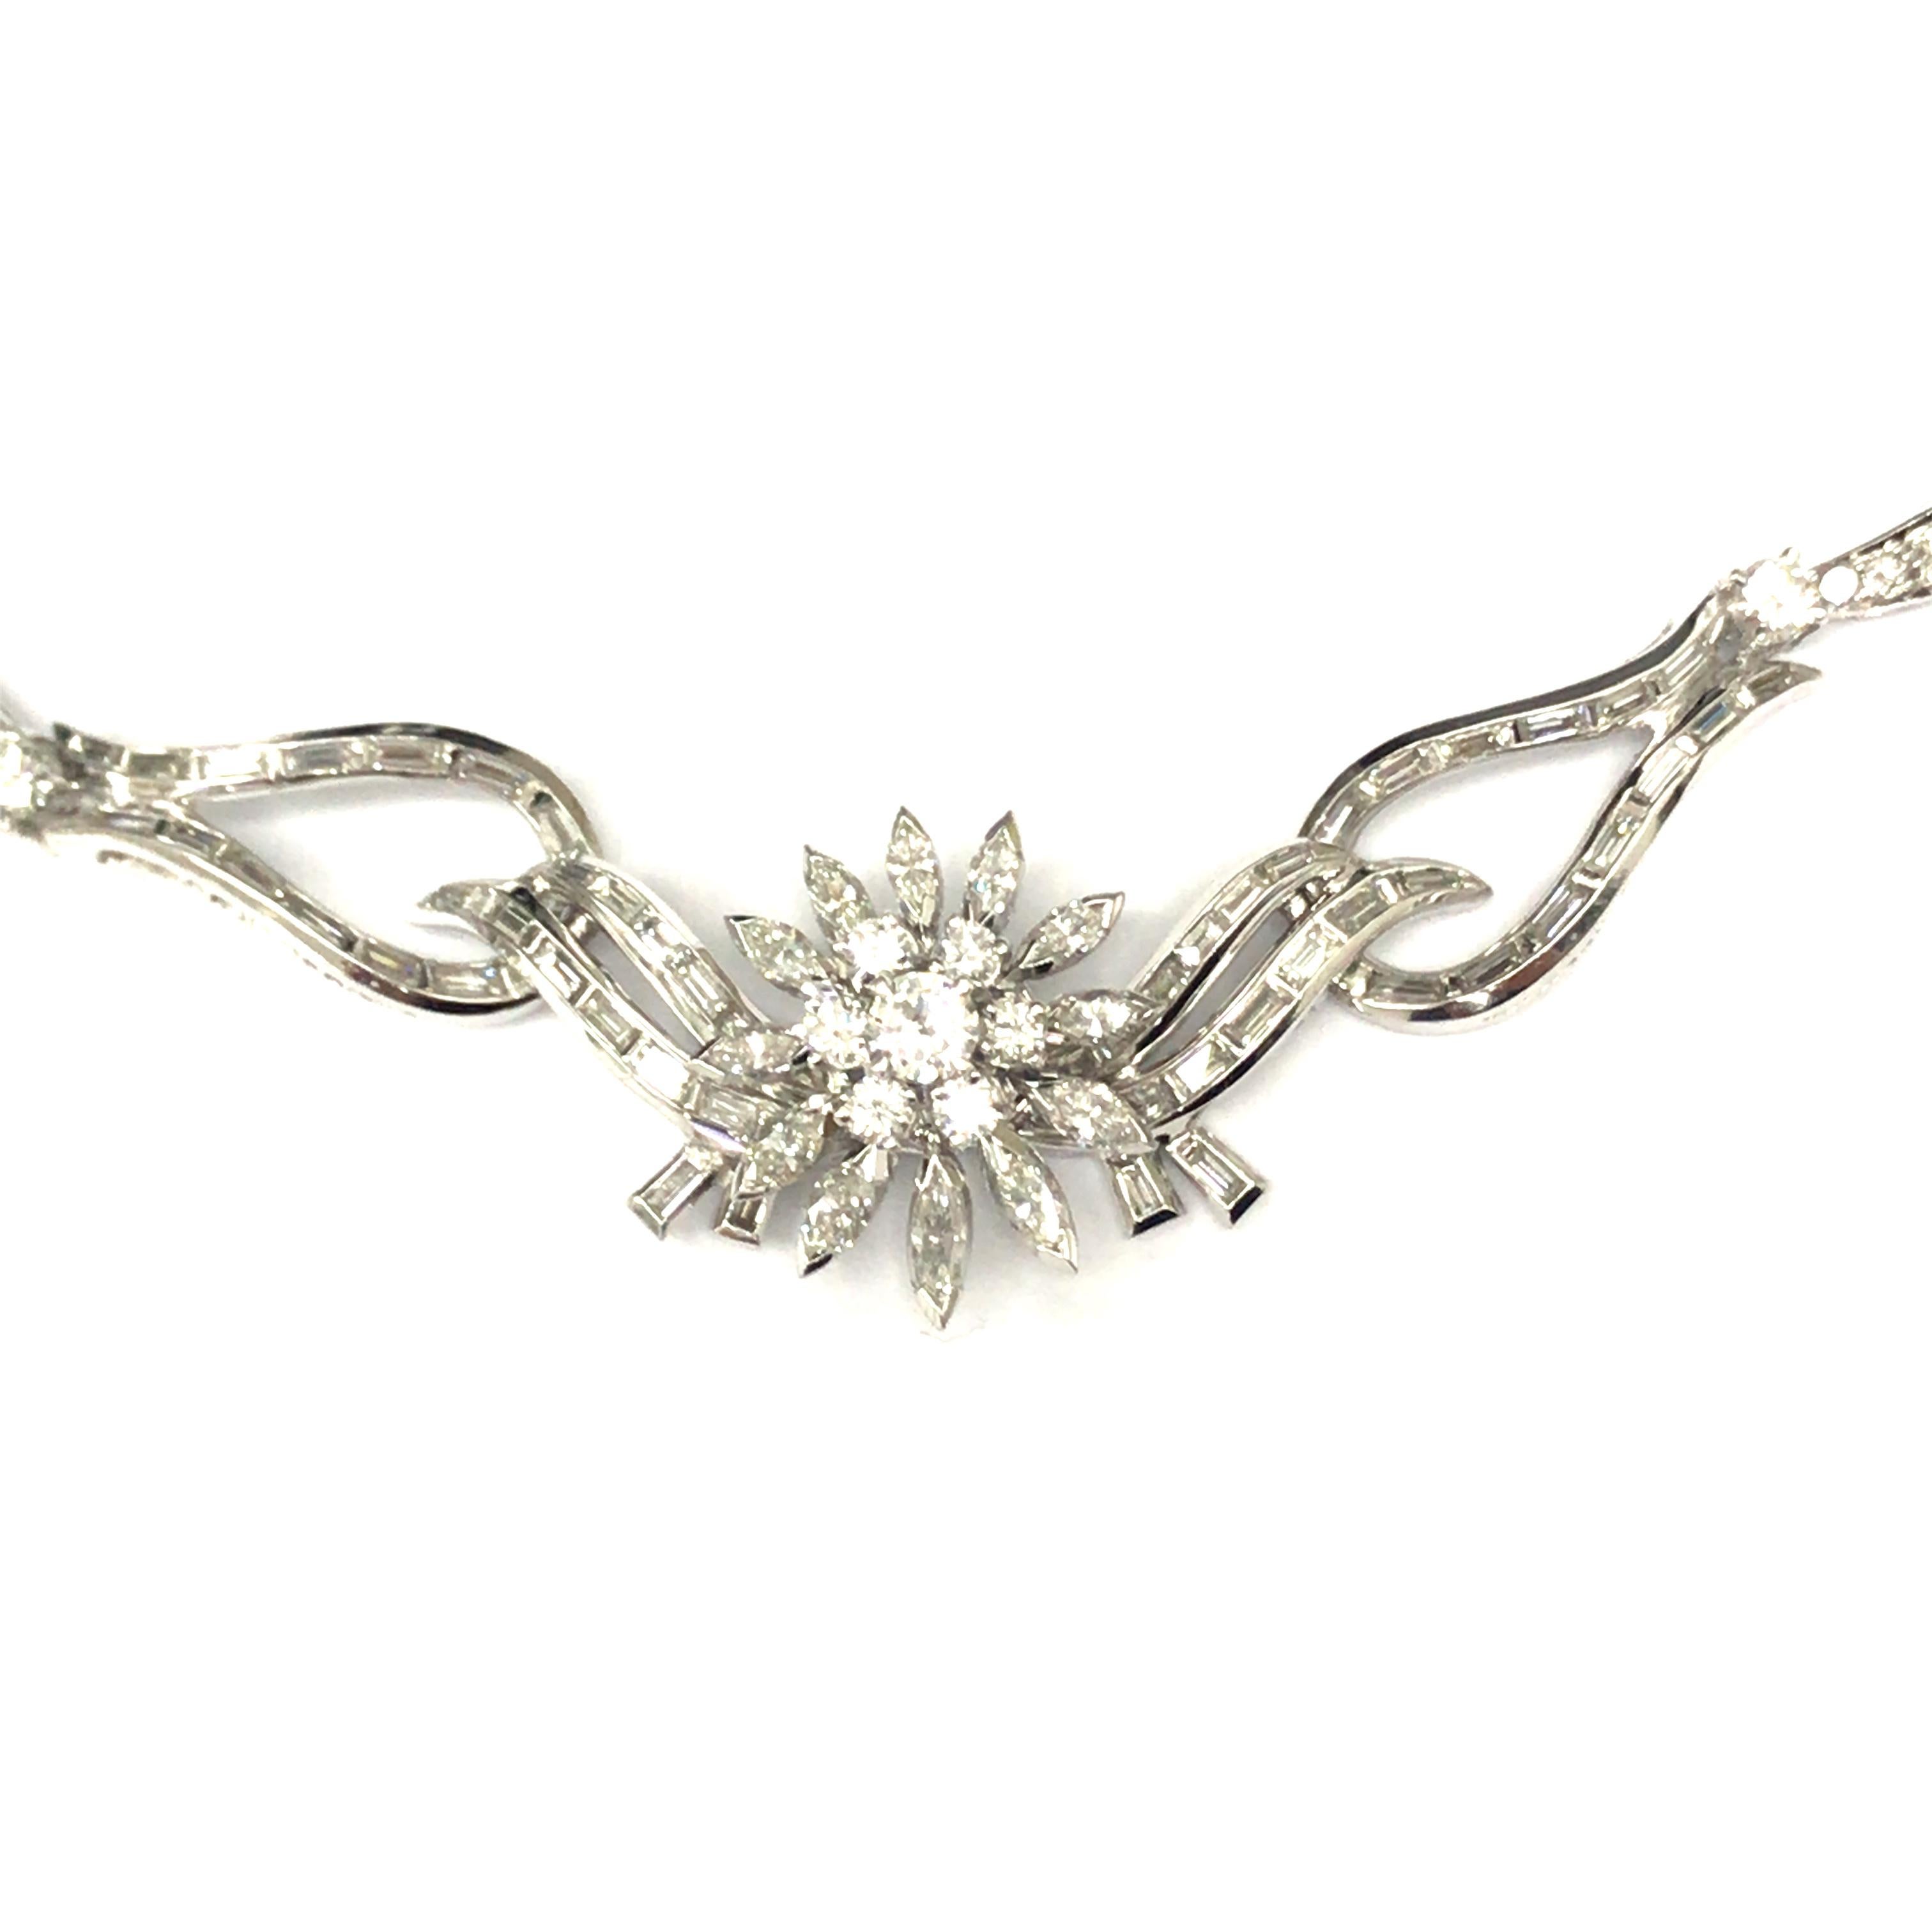 Diamond Starburst Cluster Necklace in Platinum.  Round Brilliant Cut, Marquise and Baguette Diamonds weighing 9.50 carat total weight, G-H in color and VS in clarity are expertly set.  The Necklace measures 15 1/2 inch in length and 3/4 inch in